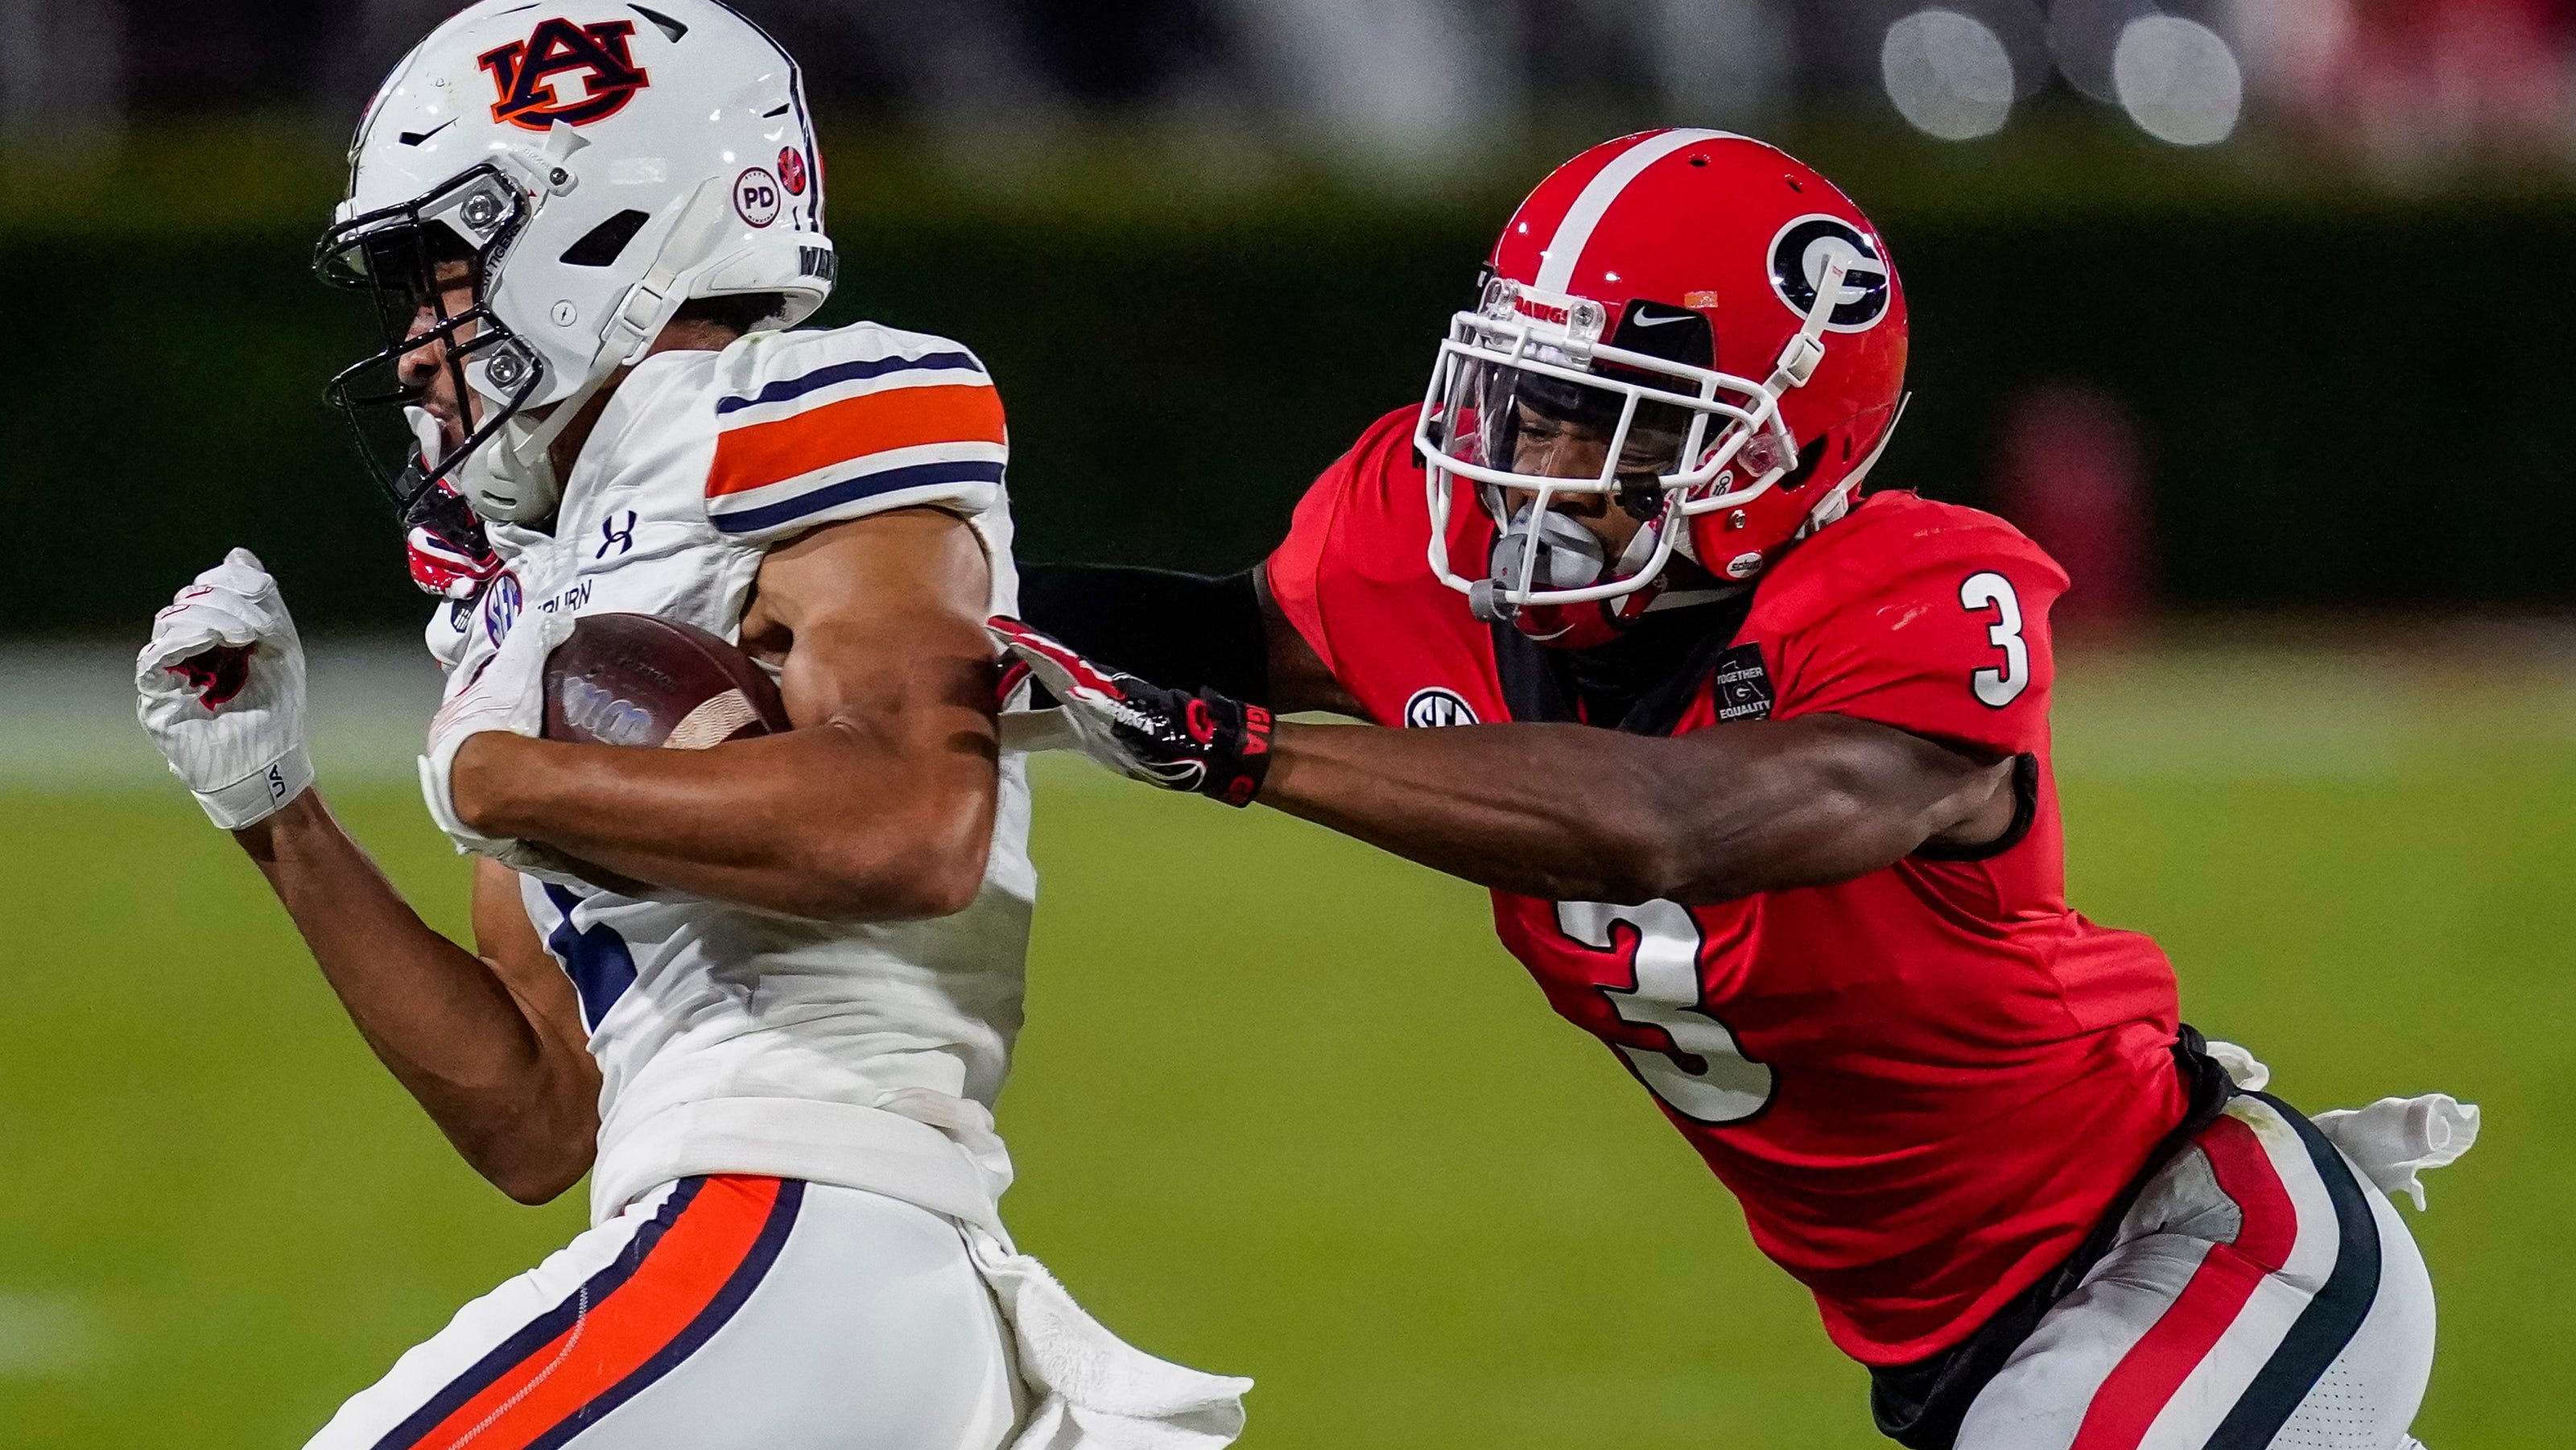 NFL Draft UGA cornerback Tyson Campbell taken in second round by Jags